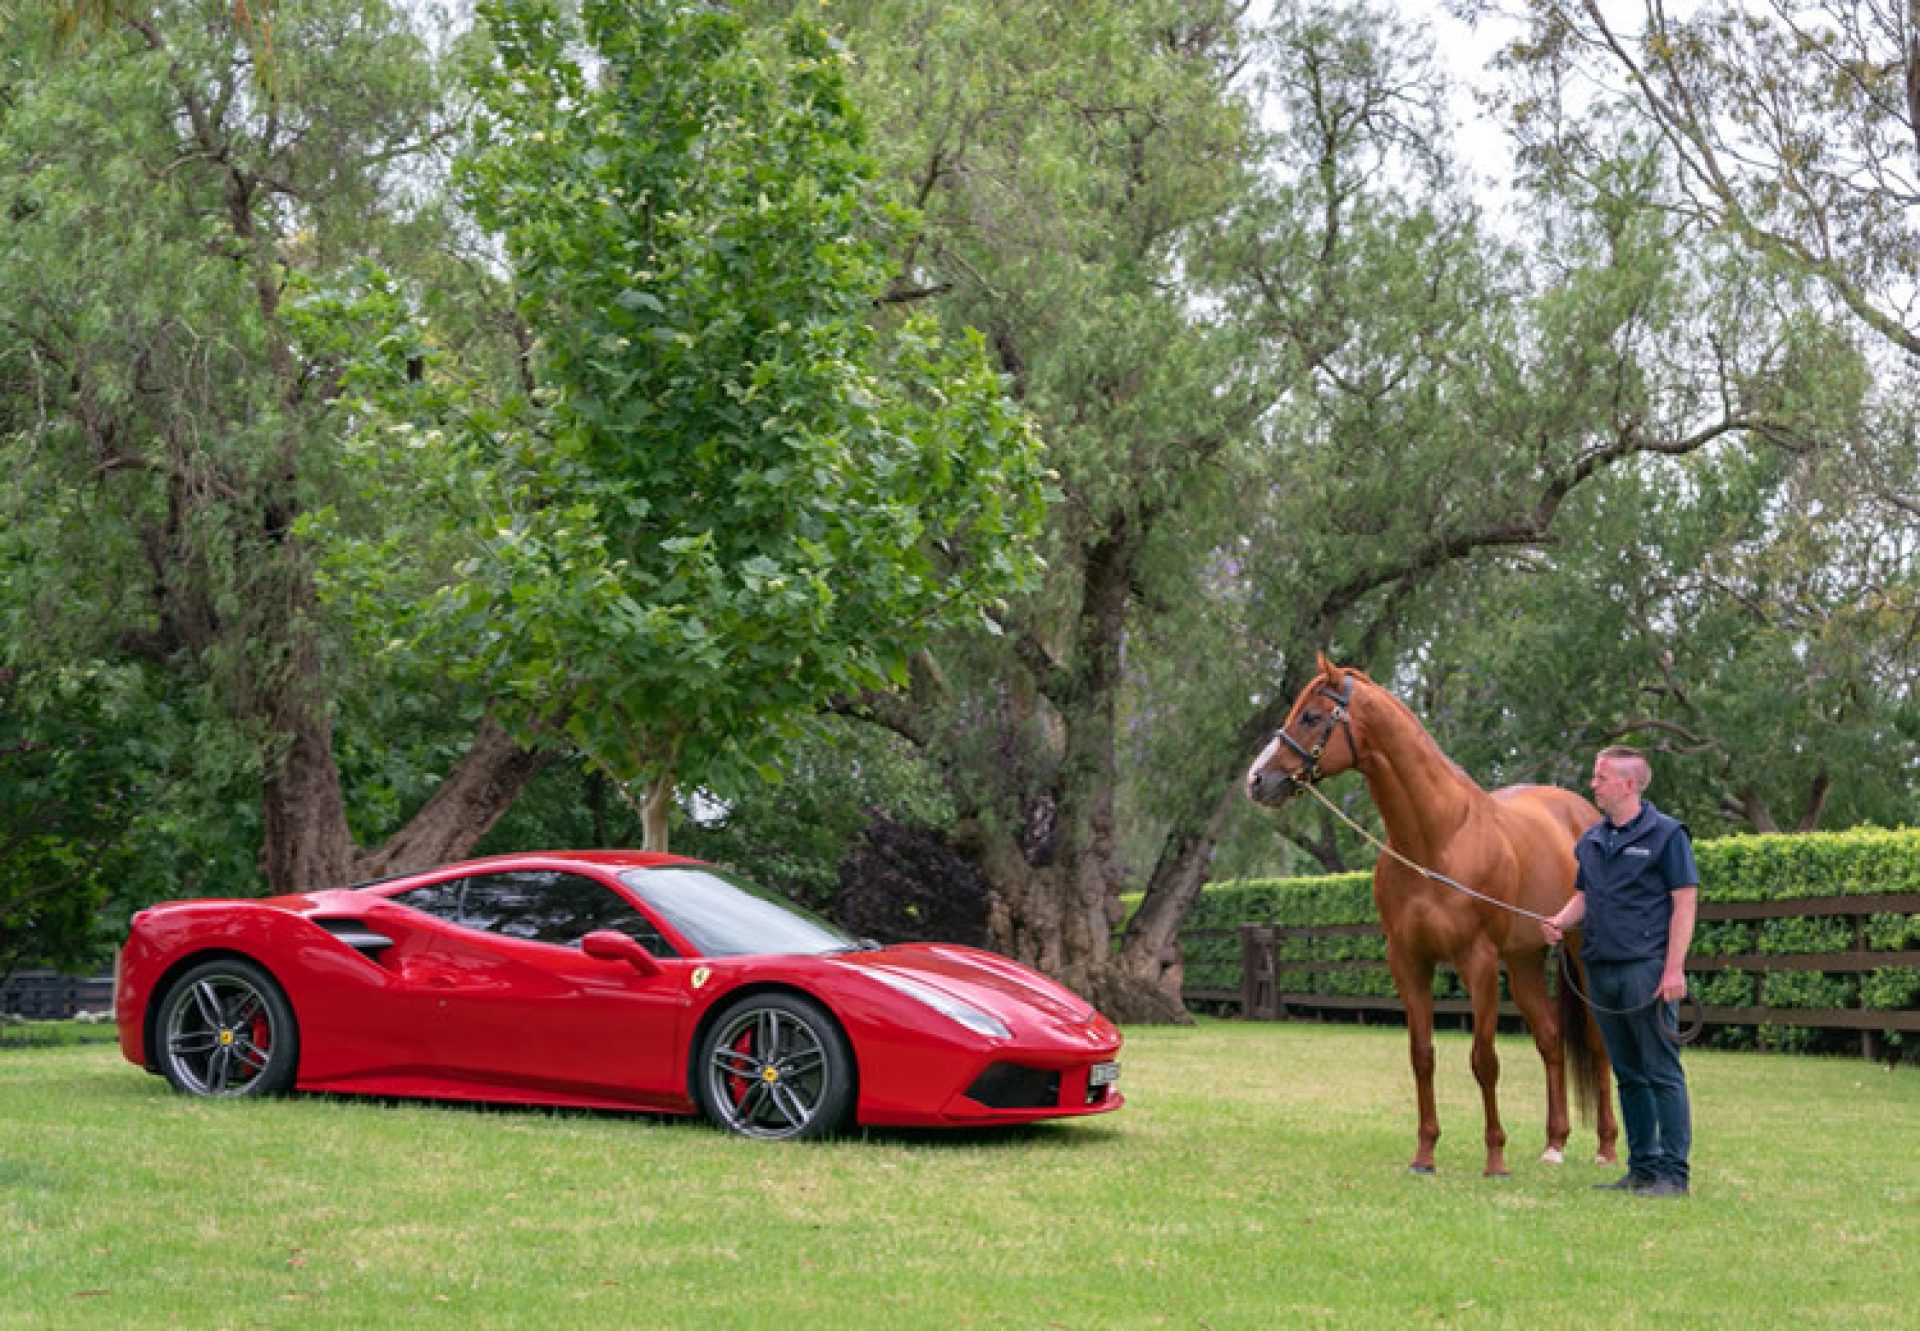 Justify pictured with Ferrari